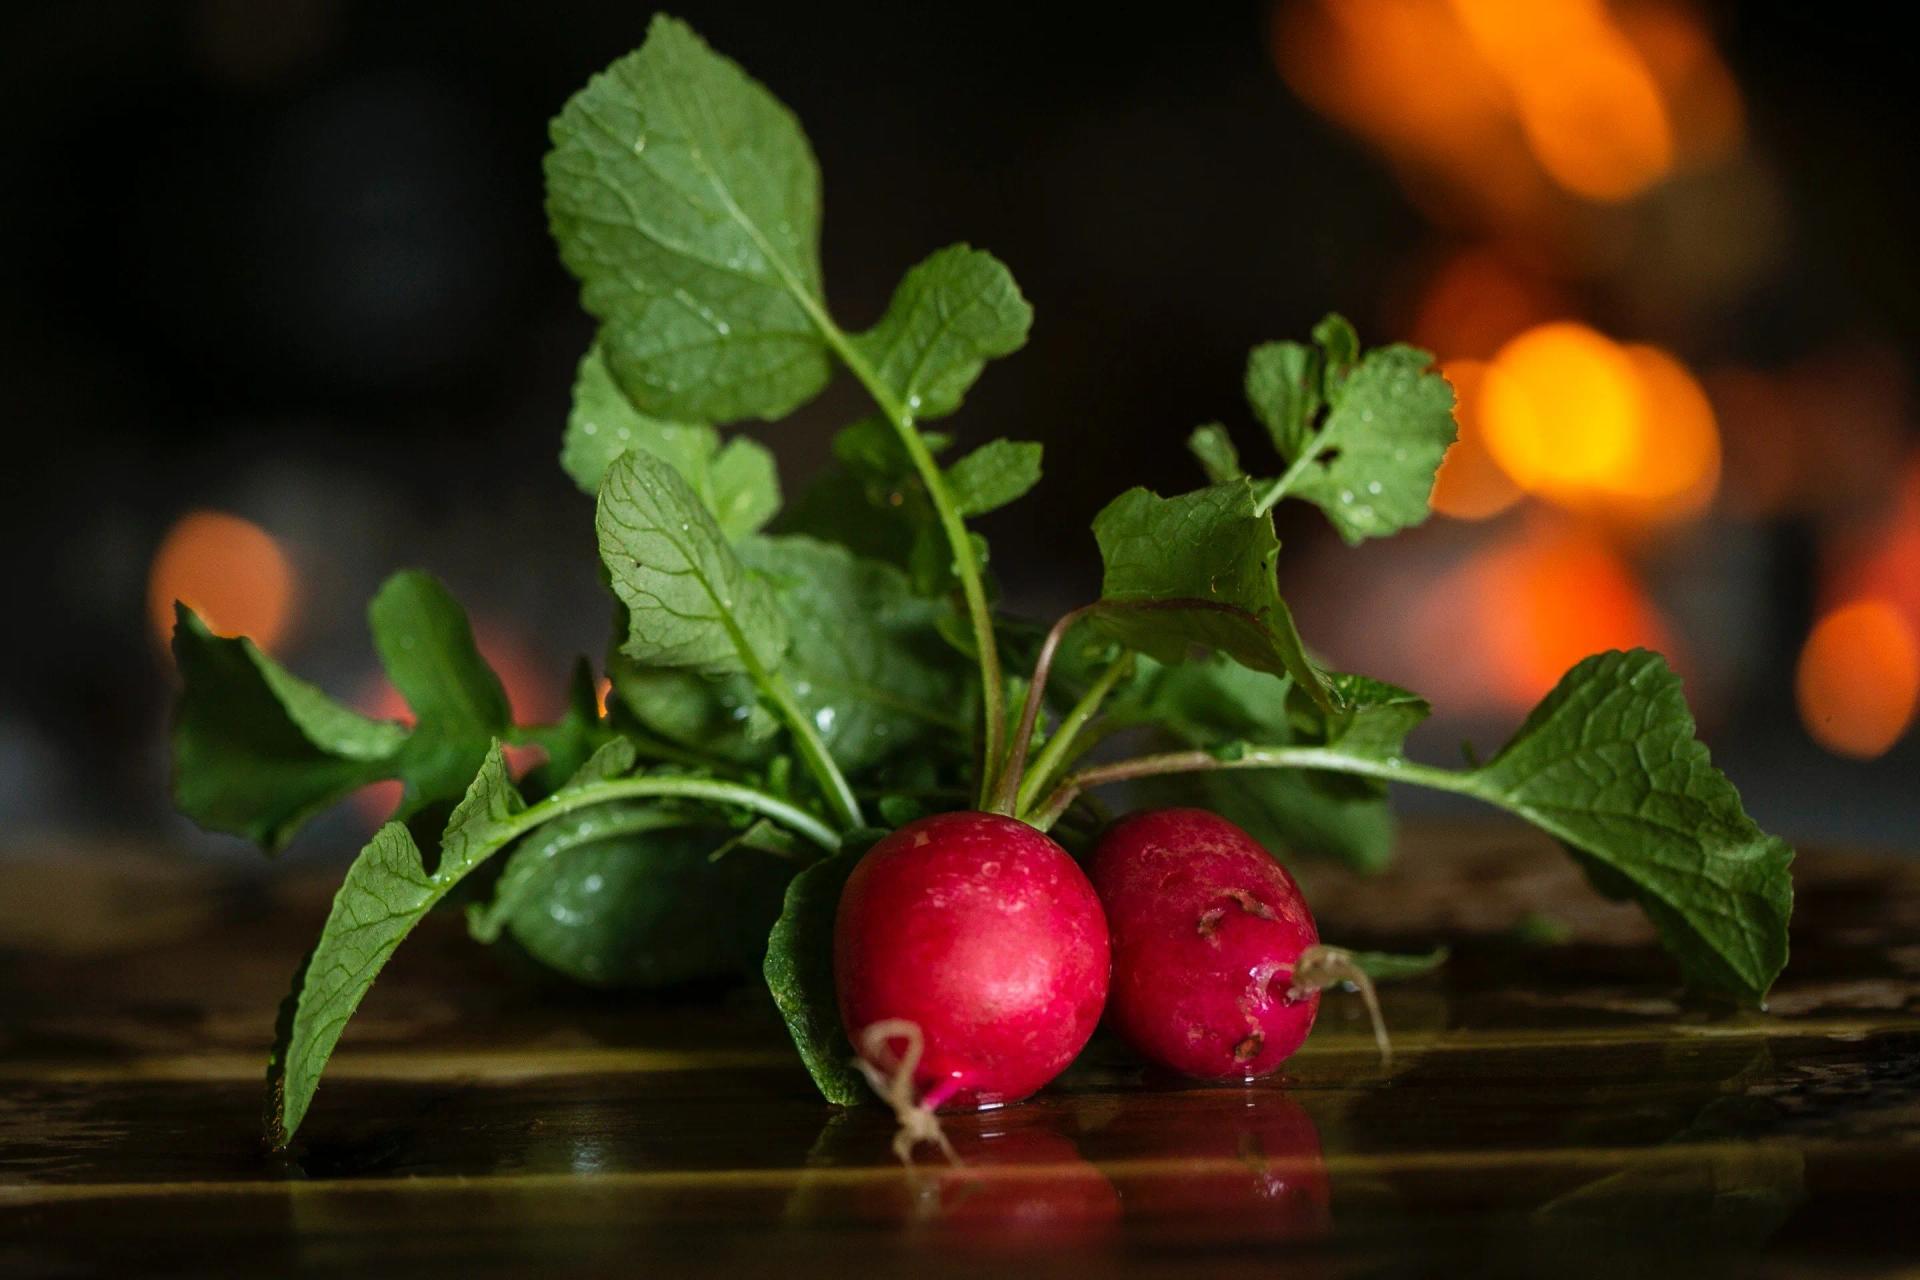 Radishes on the Table